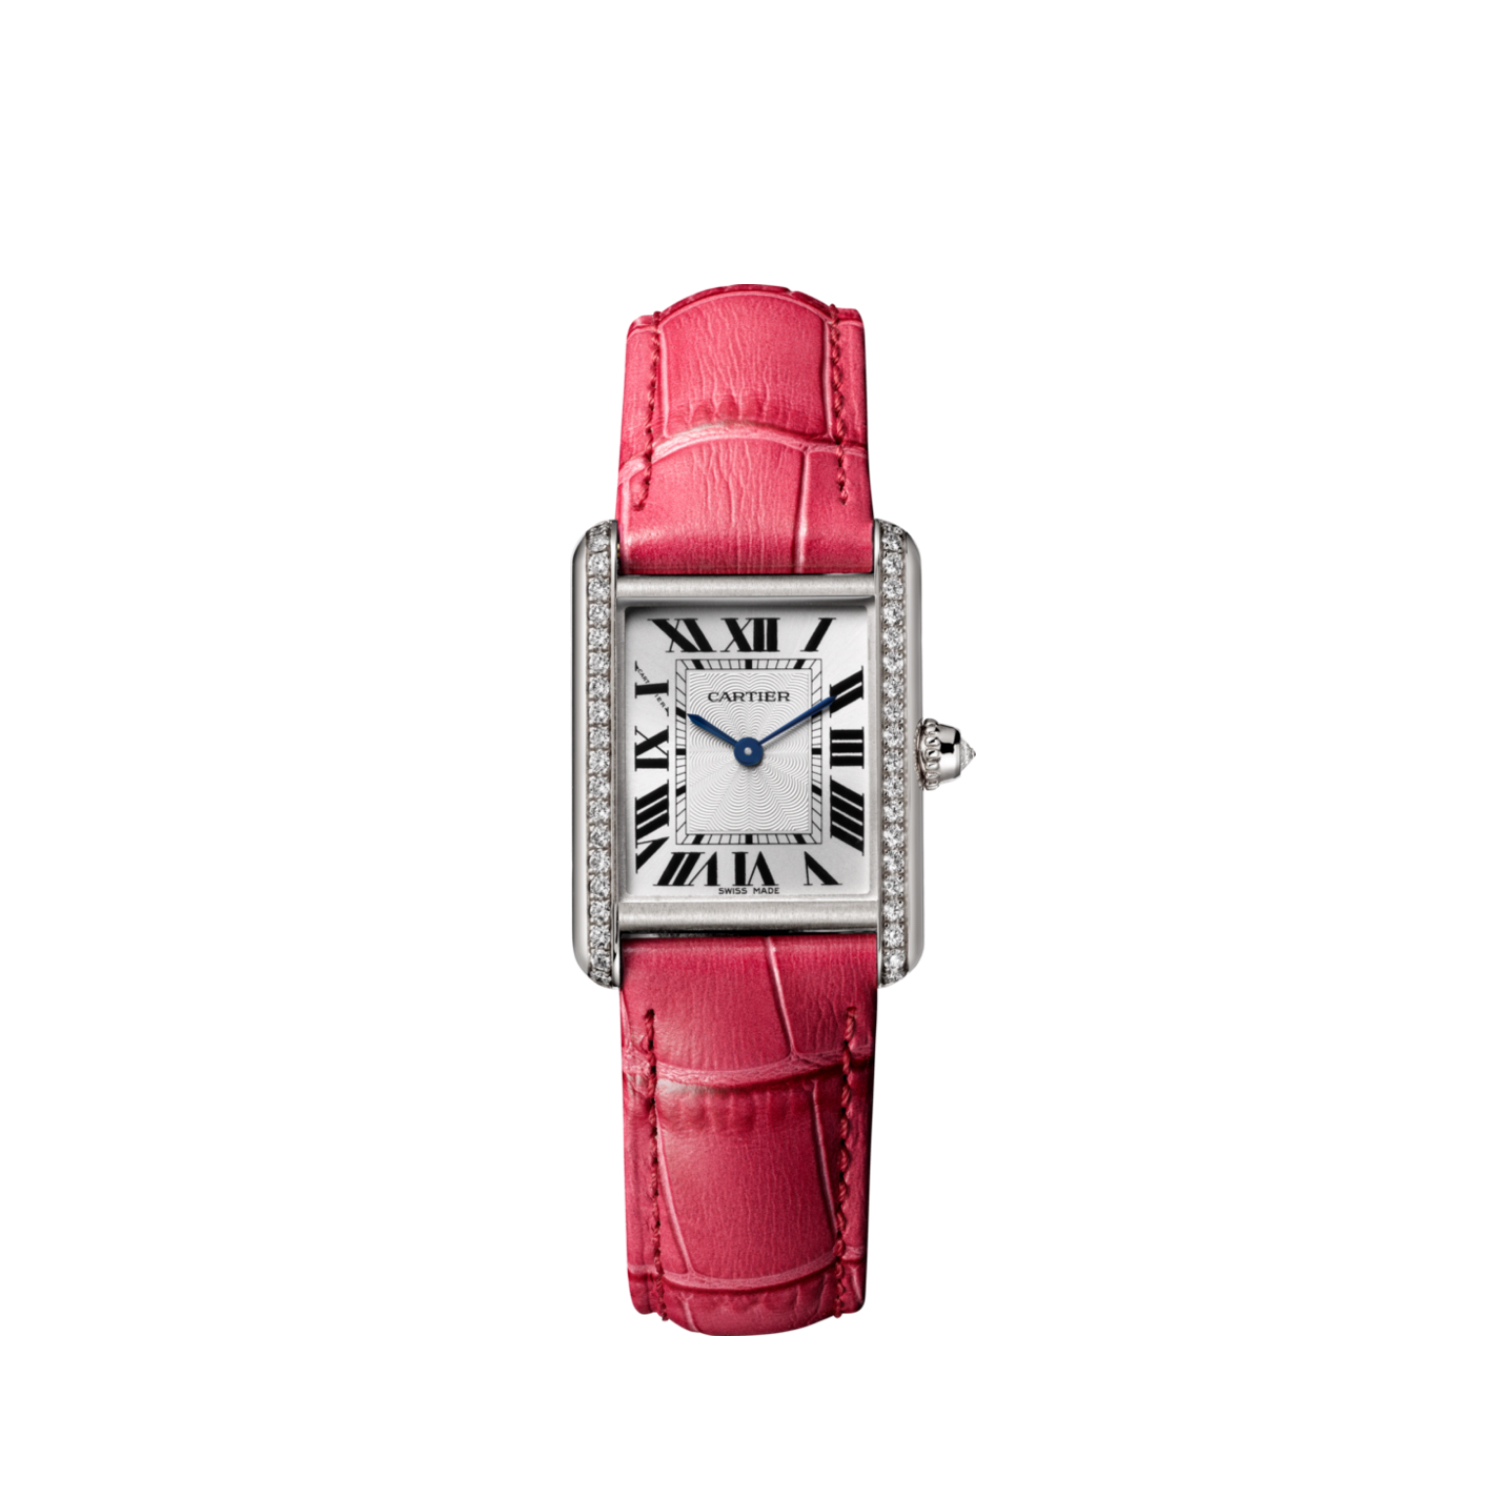 Picture of TANK LOUISE CARTIER - WHITE GOLD HAND-WOUND SMALL